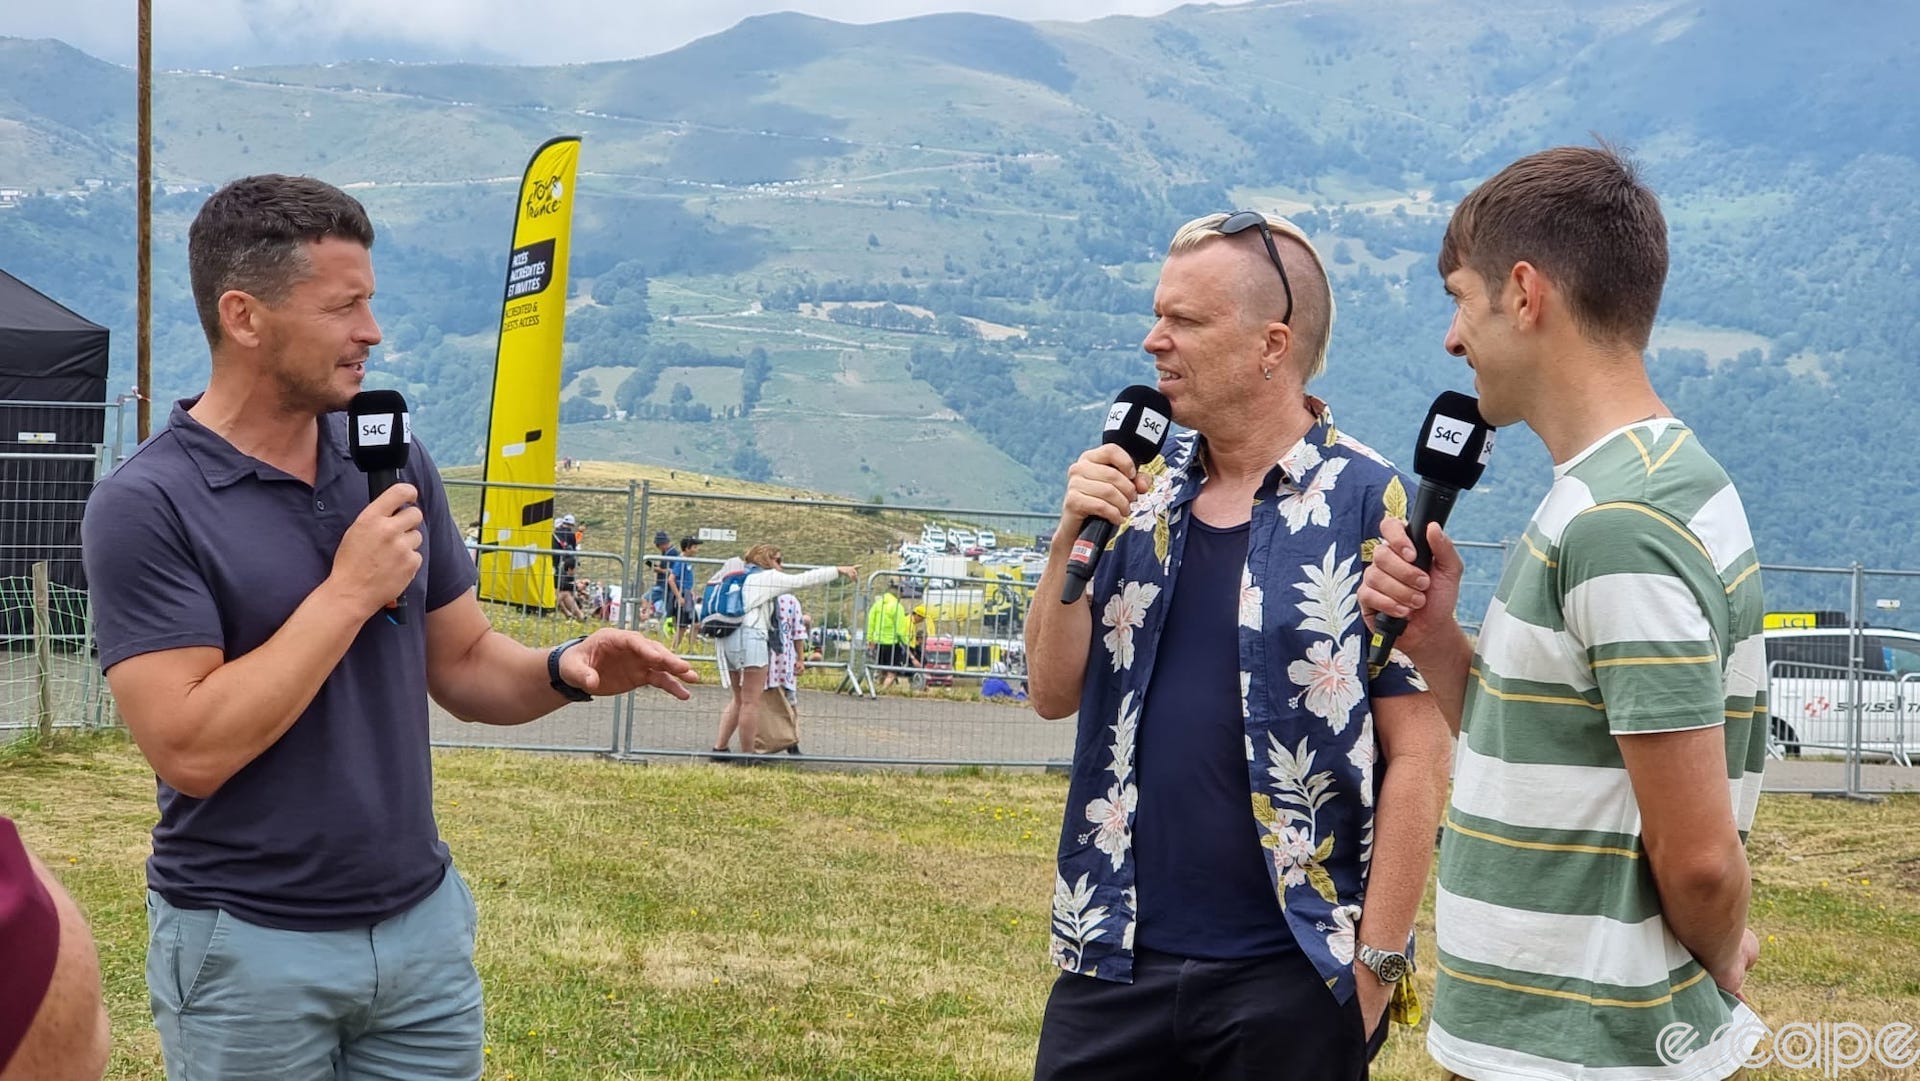 Peredur ap Gwynedd stands on an Alpine hillside at a Tour de France stage with two other men. They're dressed casually, holding TV microphones for the Welsh S4C network.